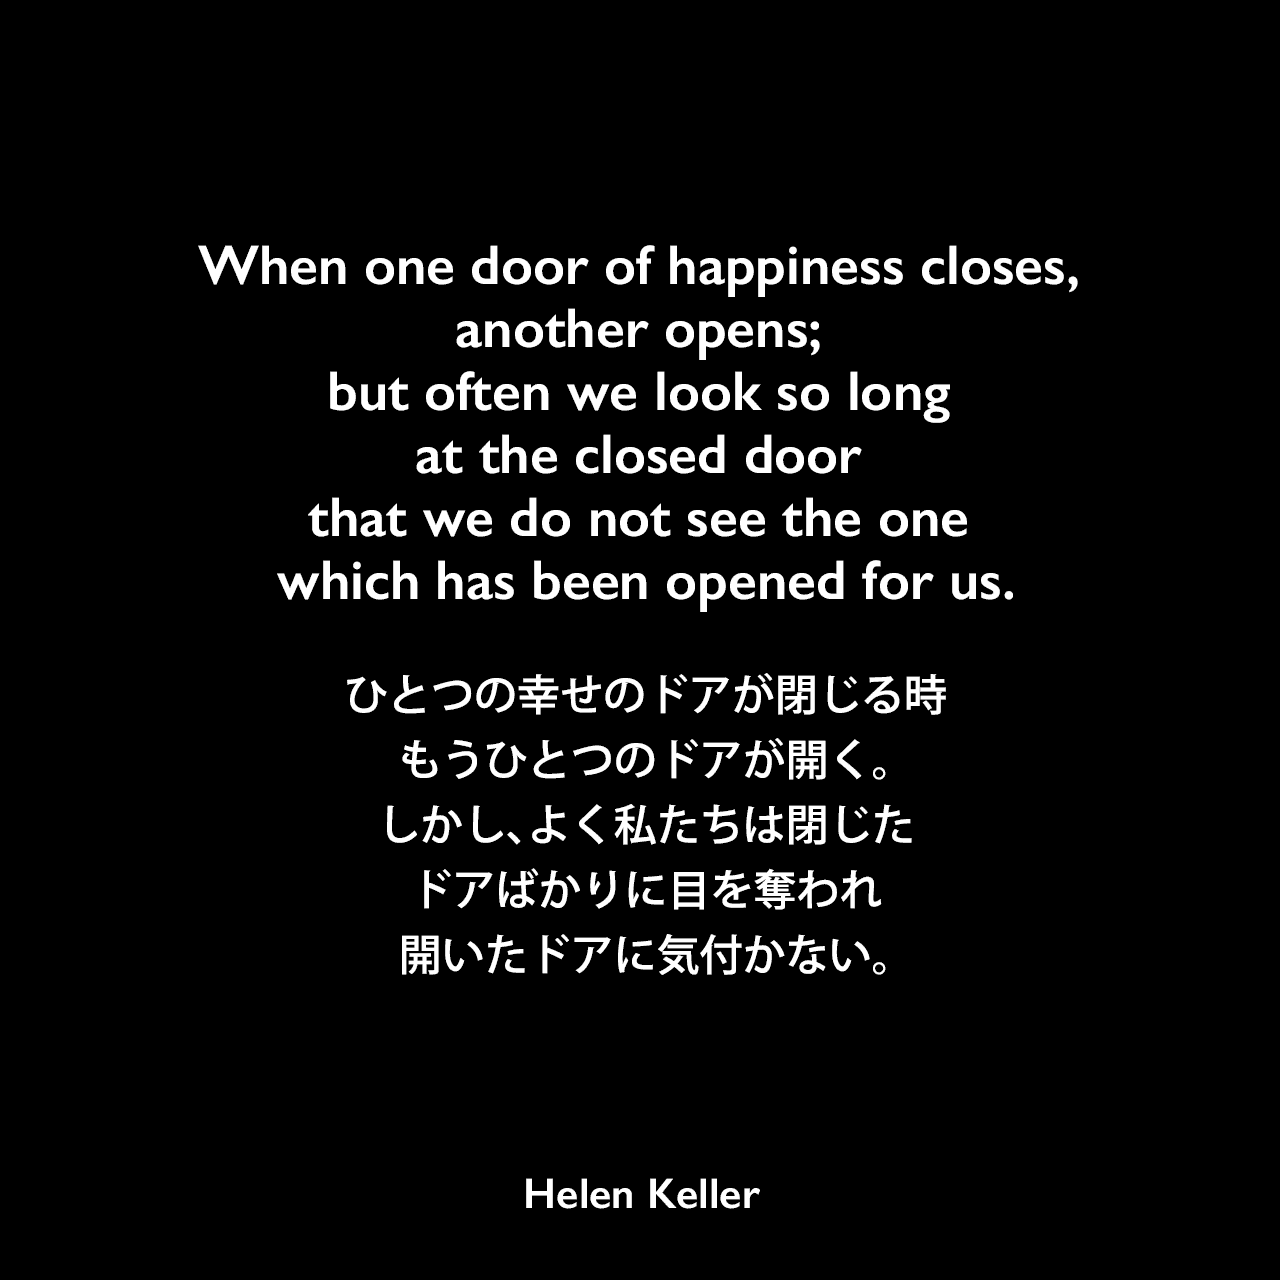 When one door of happiness closes, another opens; but often we look so long at the closed door that we do not see the one which has been opened for us.ひとつの幸せのドアが閉じる時、もうひとつのドアが開く。しかし、よく私たちは閉じたドアばかりに目を奪われ、開いたドアに気付かない。- ヘレン・ケラーの本「We Bereaved」よりHelen Keller